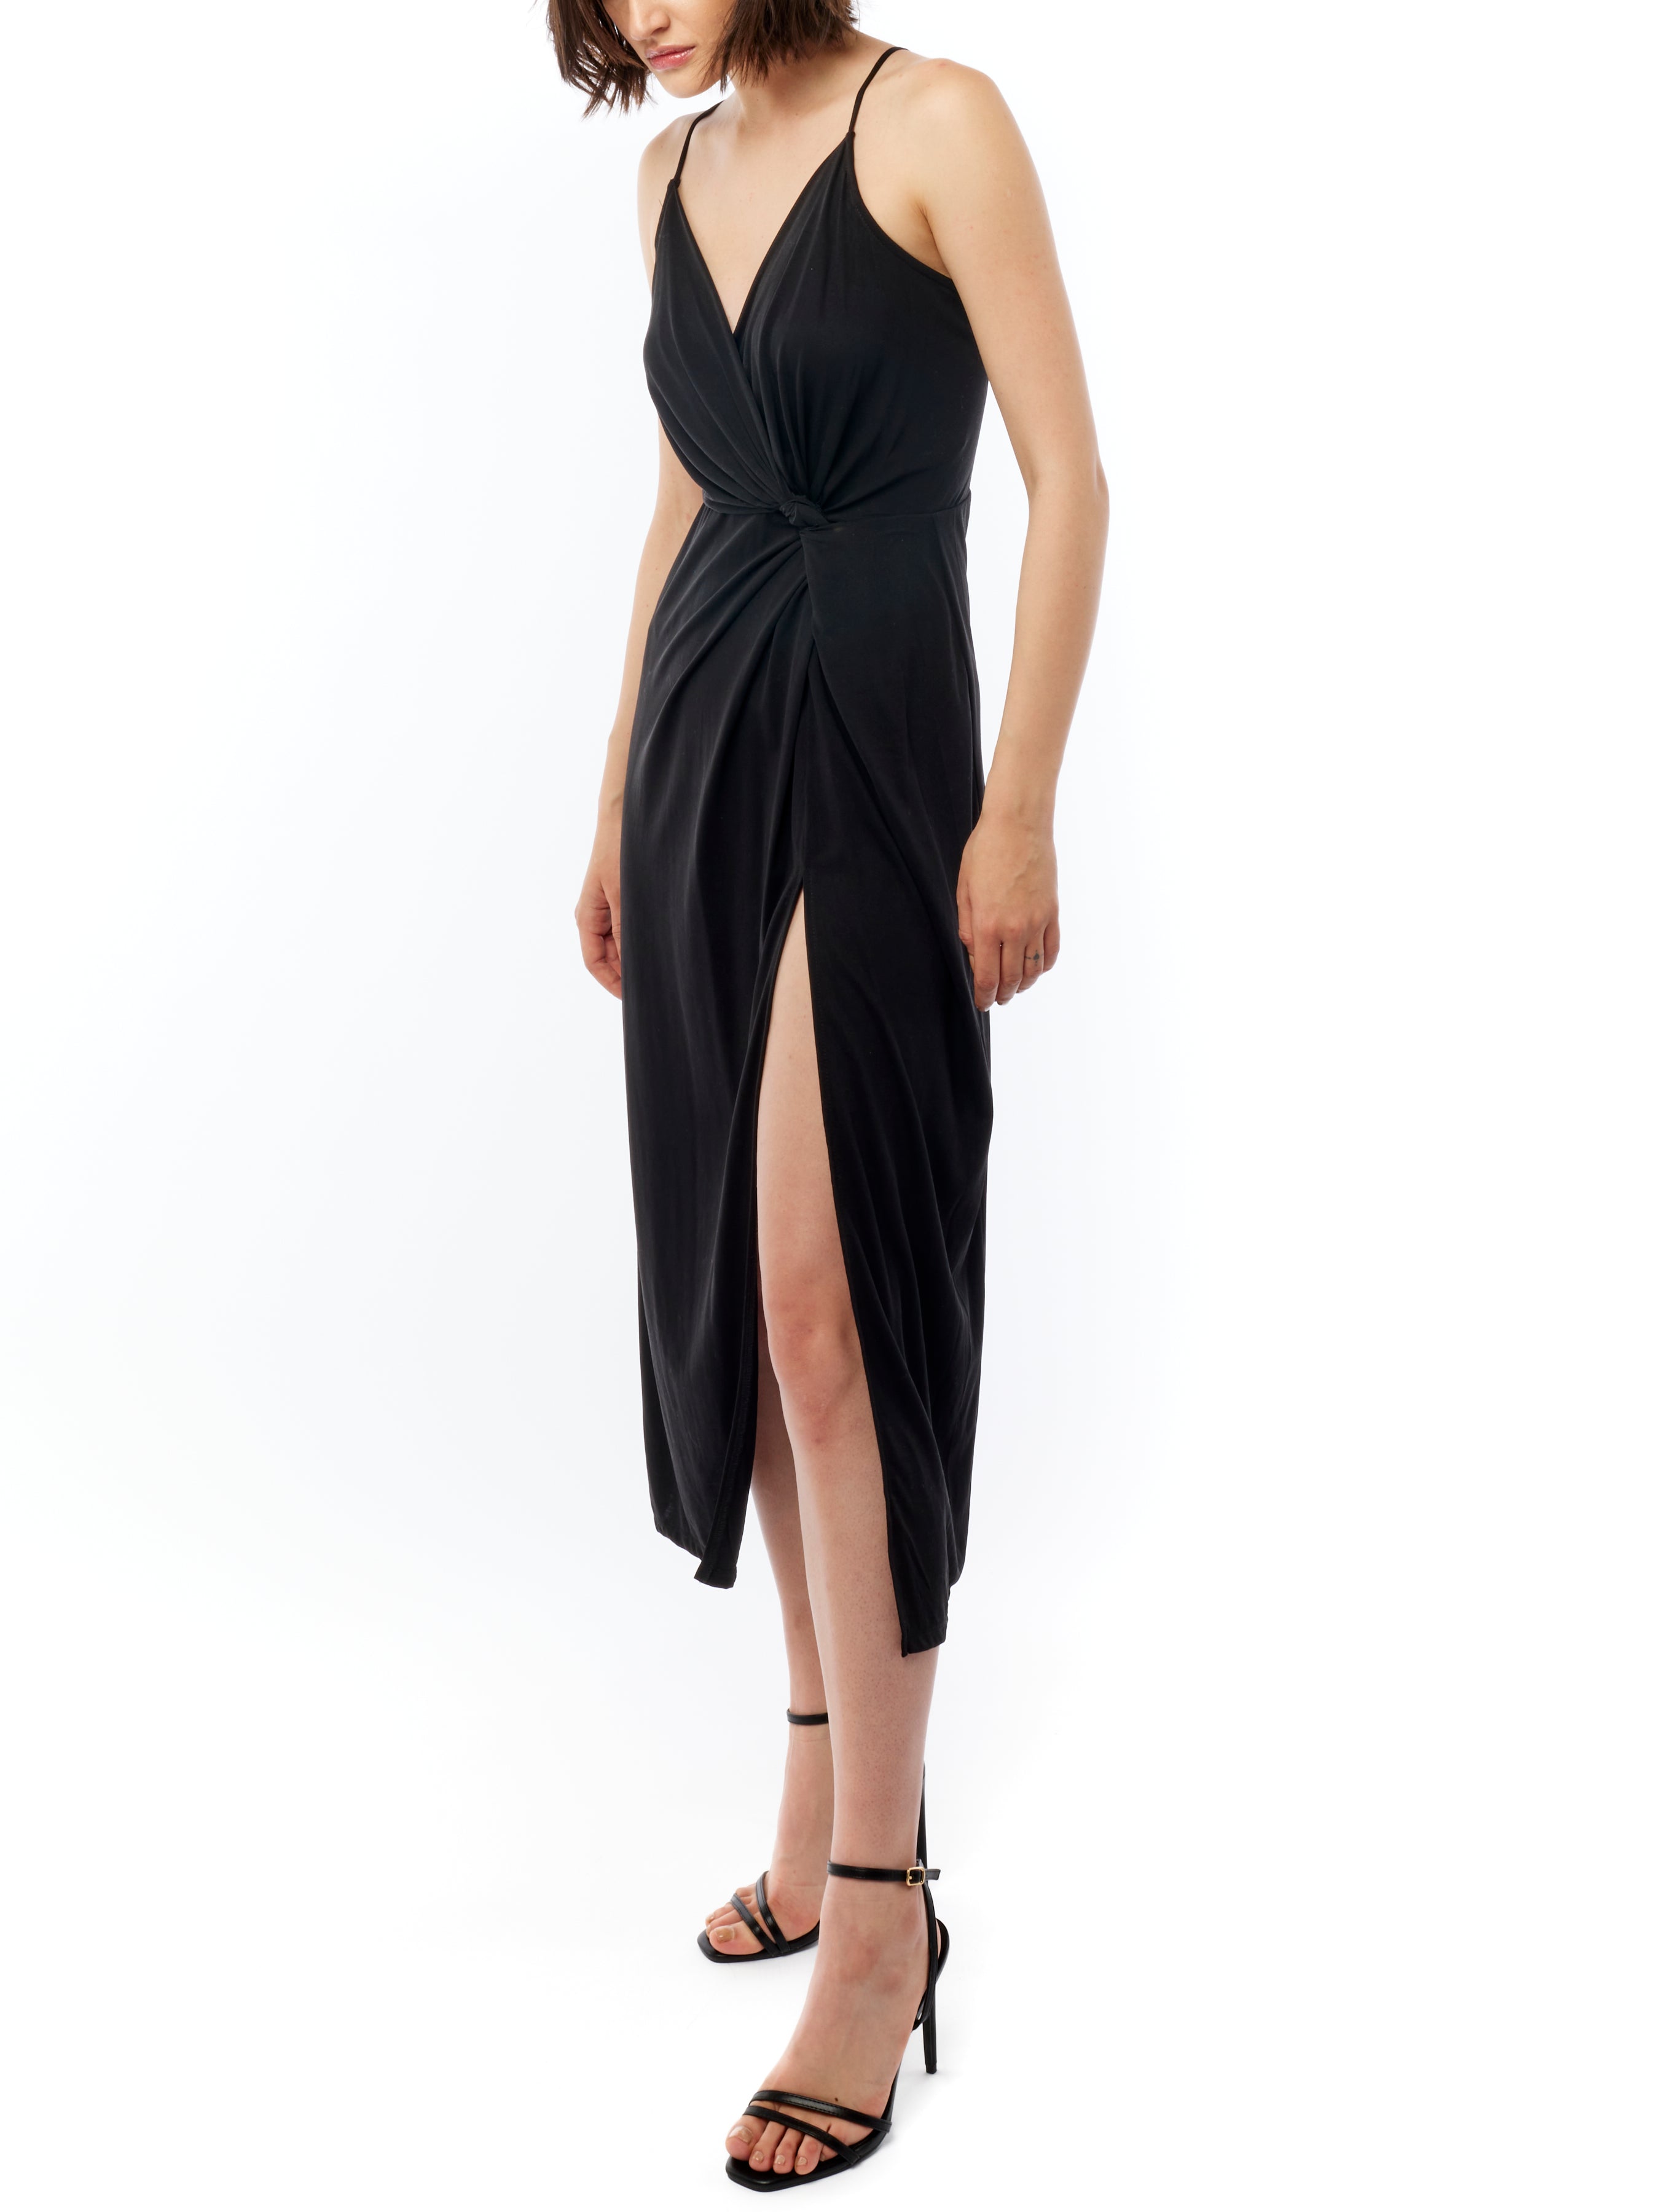 midi dress with a surplice top, gathered twist front, adjustable spaghetti straps and side slit in black